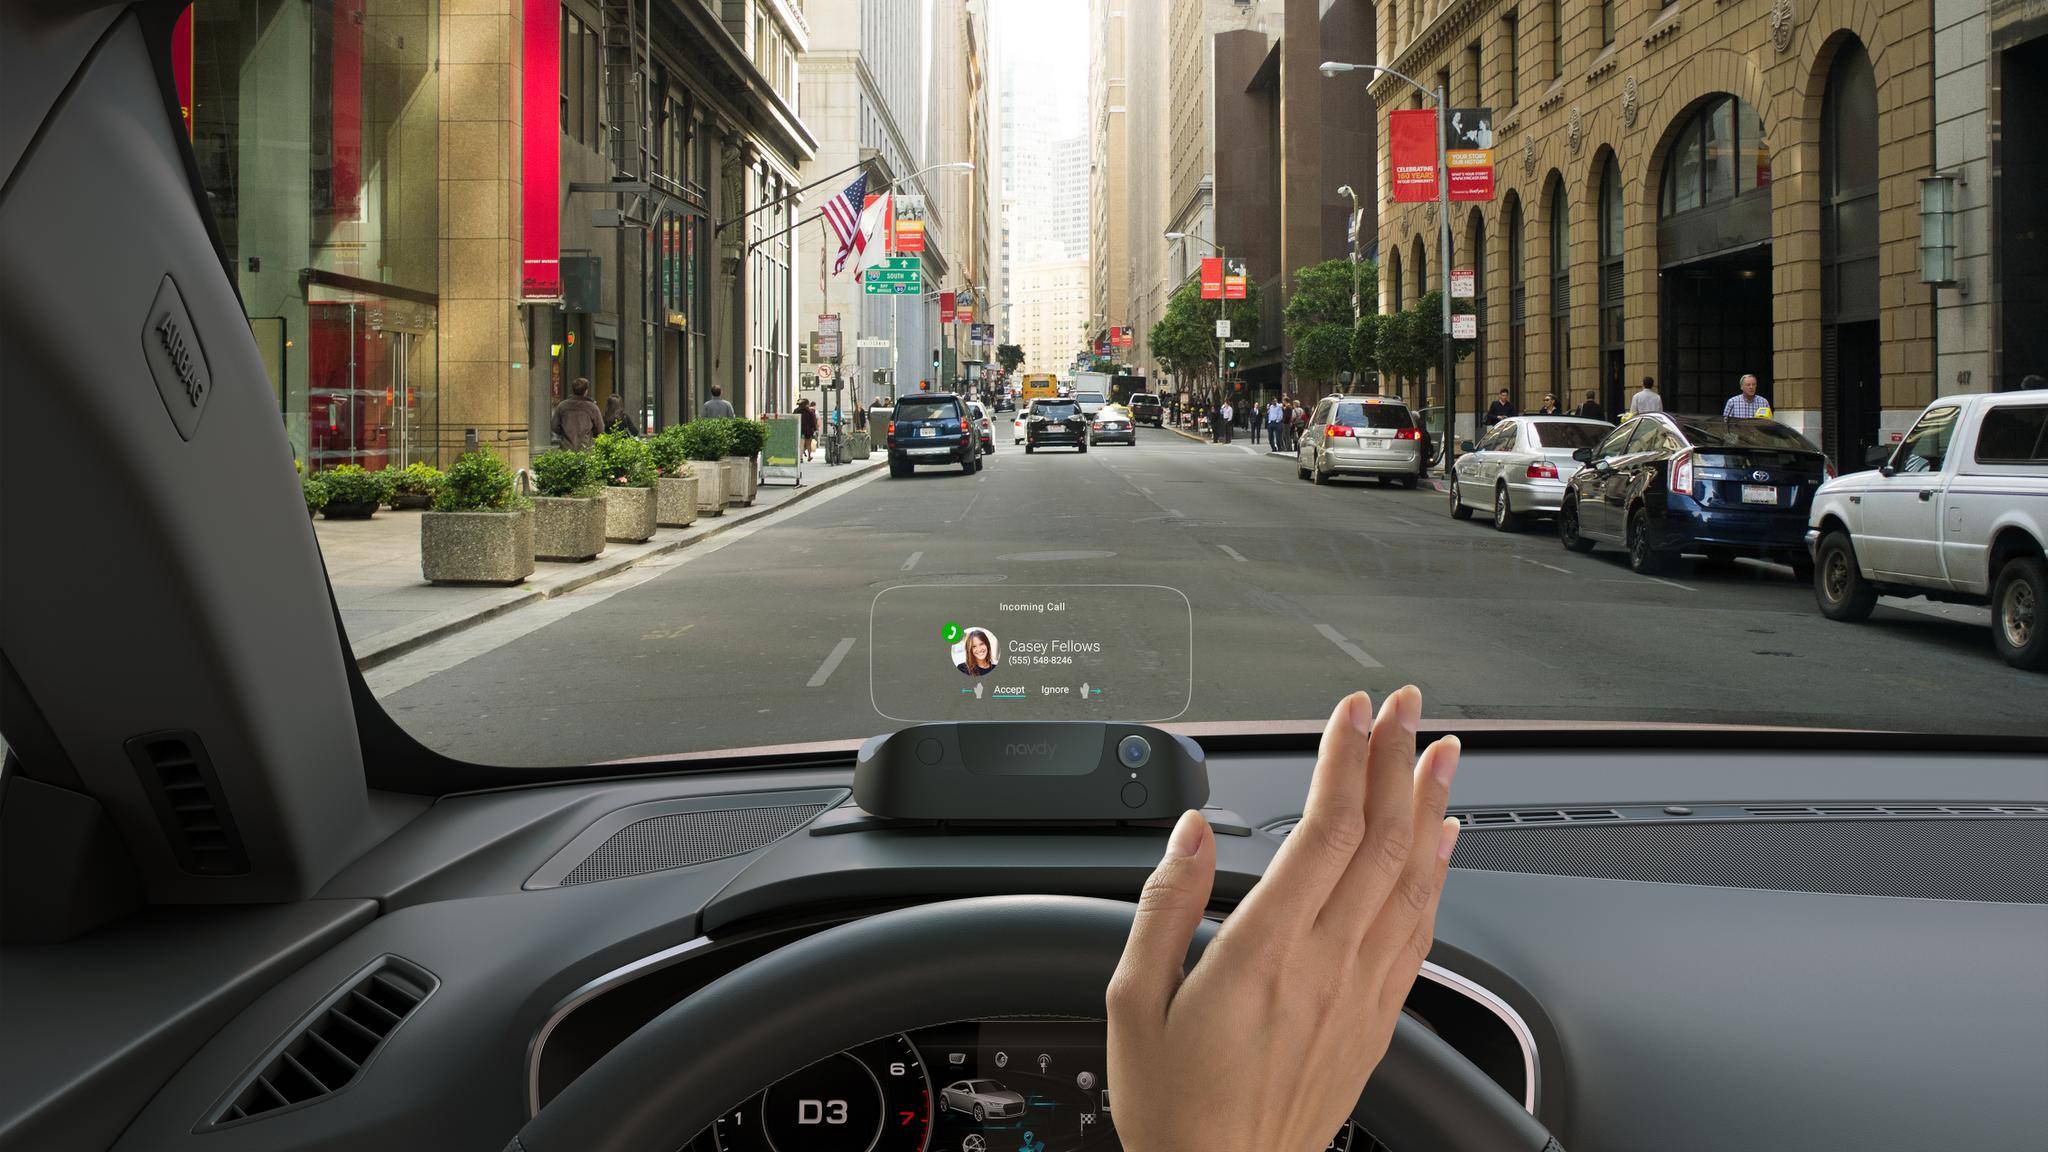 Augmented-reality windshields could revolutionize driving - The Globe and  Mail